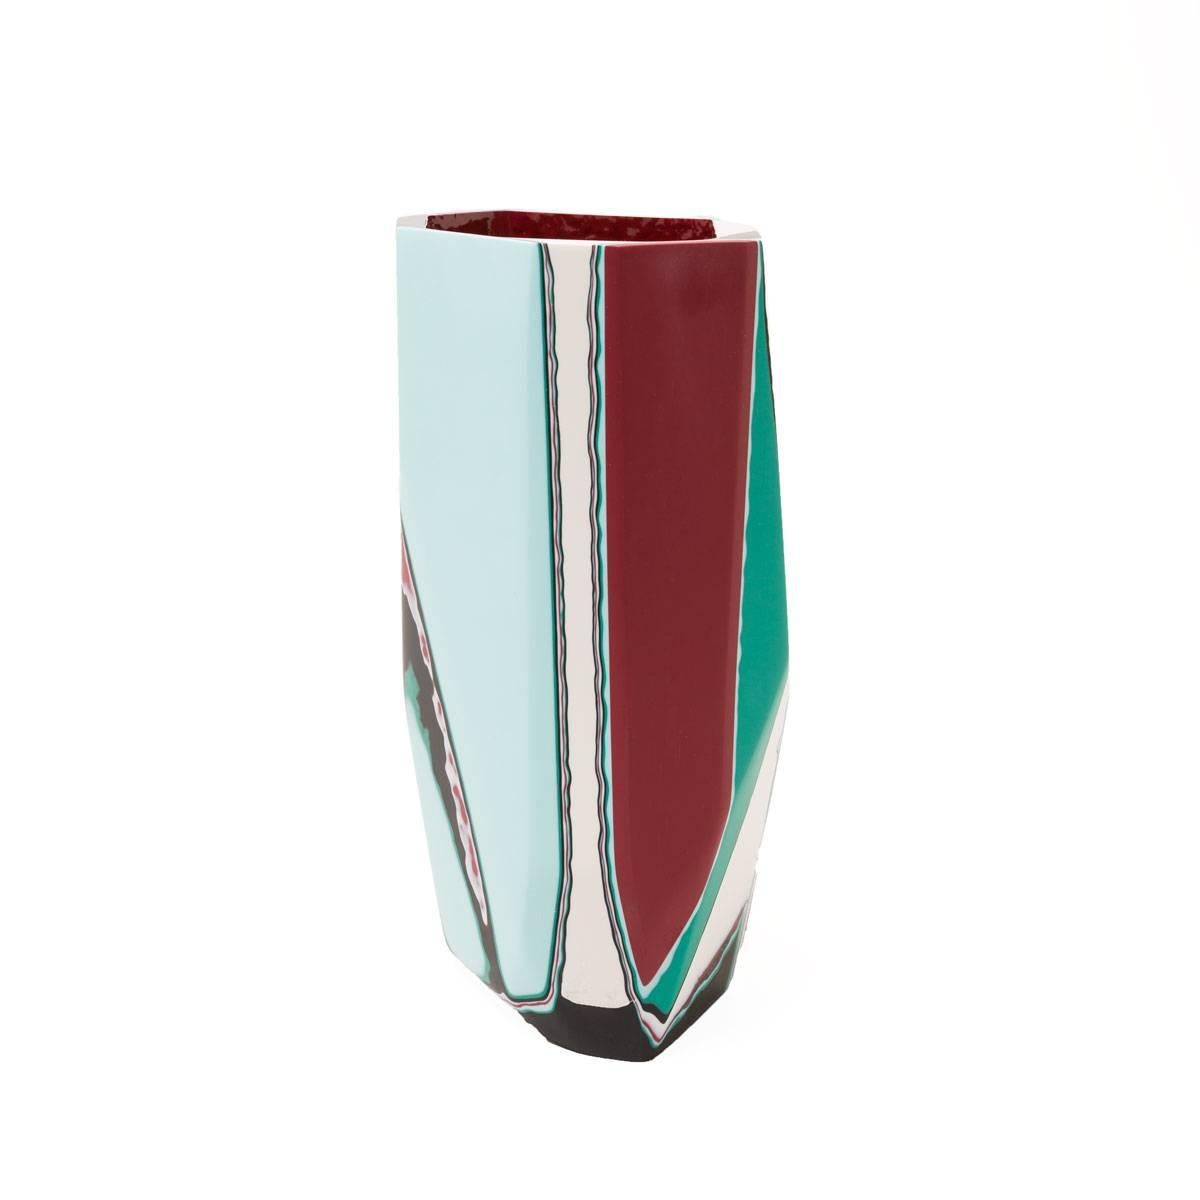 The bold and graphic Taku vase is part of our Black Magic collection, inspired by the concept of revealing that which has been hidden from sight, but remains ever-present.

Gazing toward the past, to cultures and civilizations at the edge of our